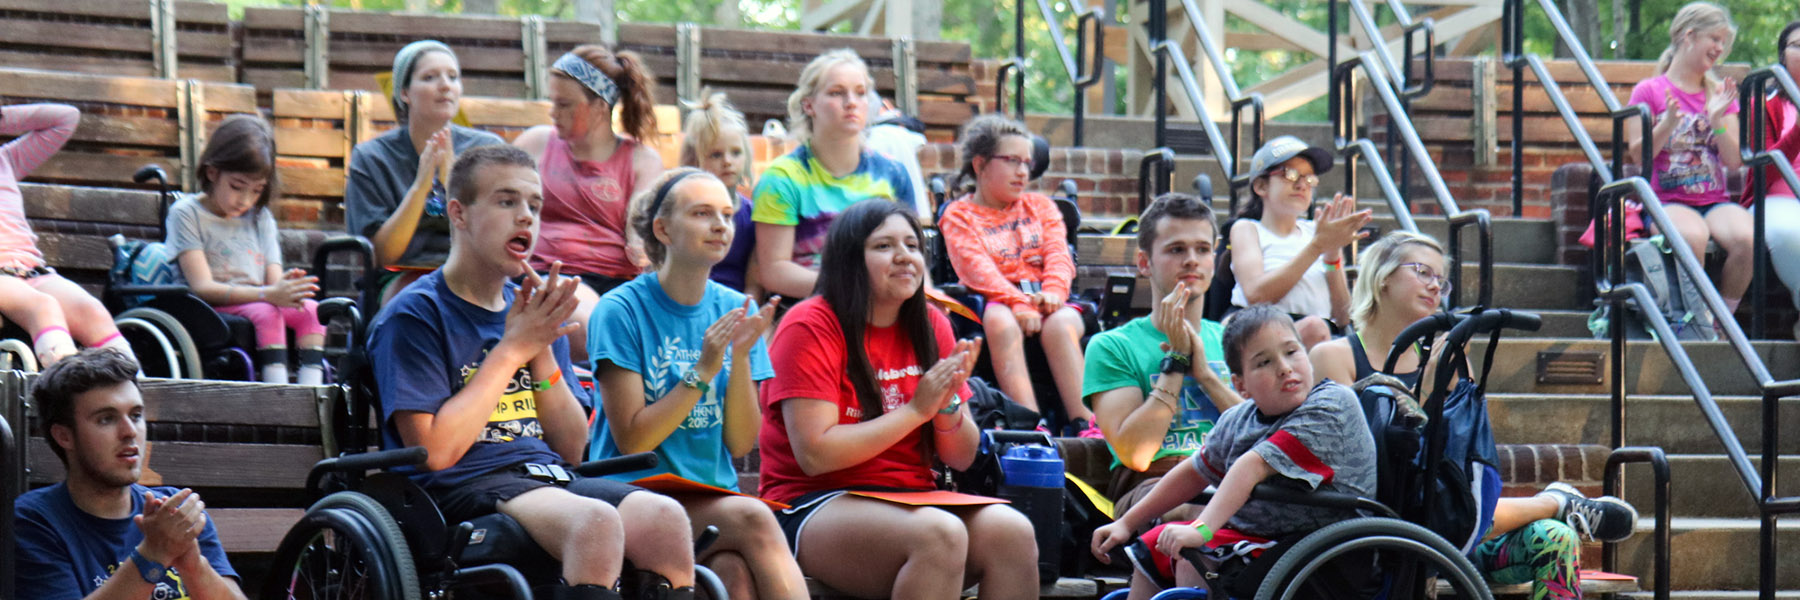 Smiling campers and staff members sitting in the amphitheater.